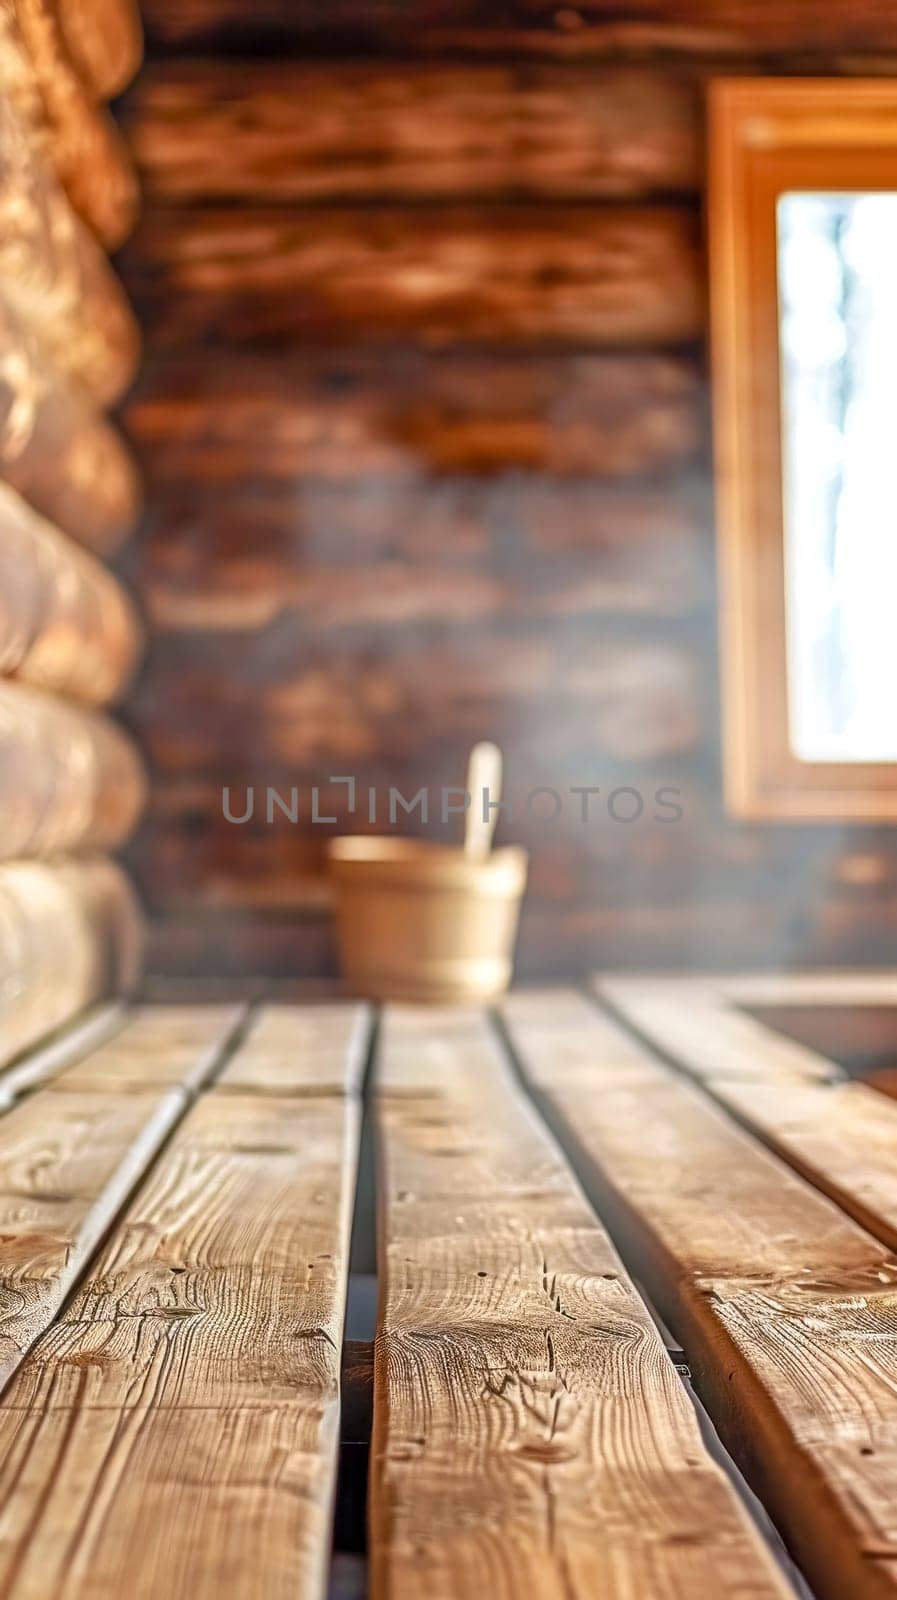 wooden sauna, focus on the wooden benches leading to a sauna bucket and ladle, all bathed in the soft, golden light filtering through a window, suggesting a peaceful and relaxing sauna experience